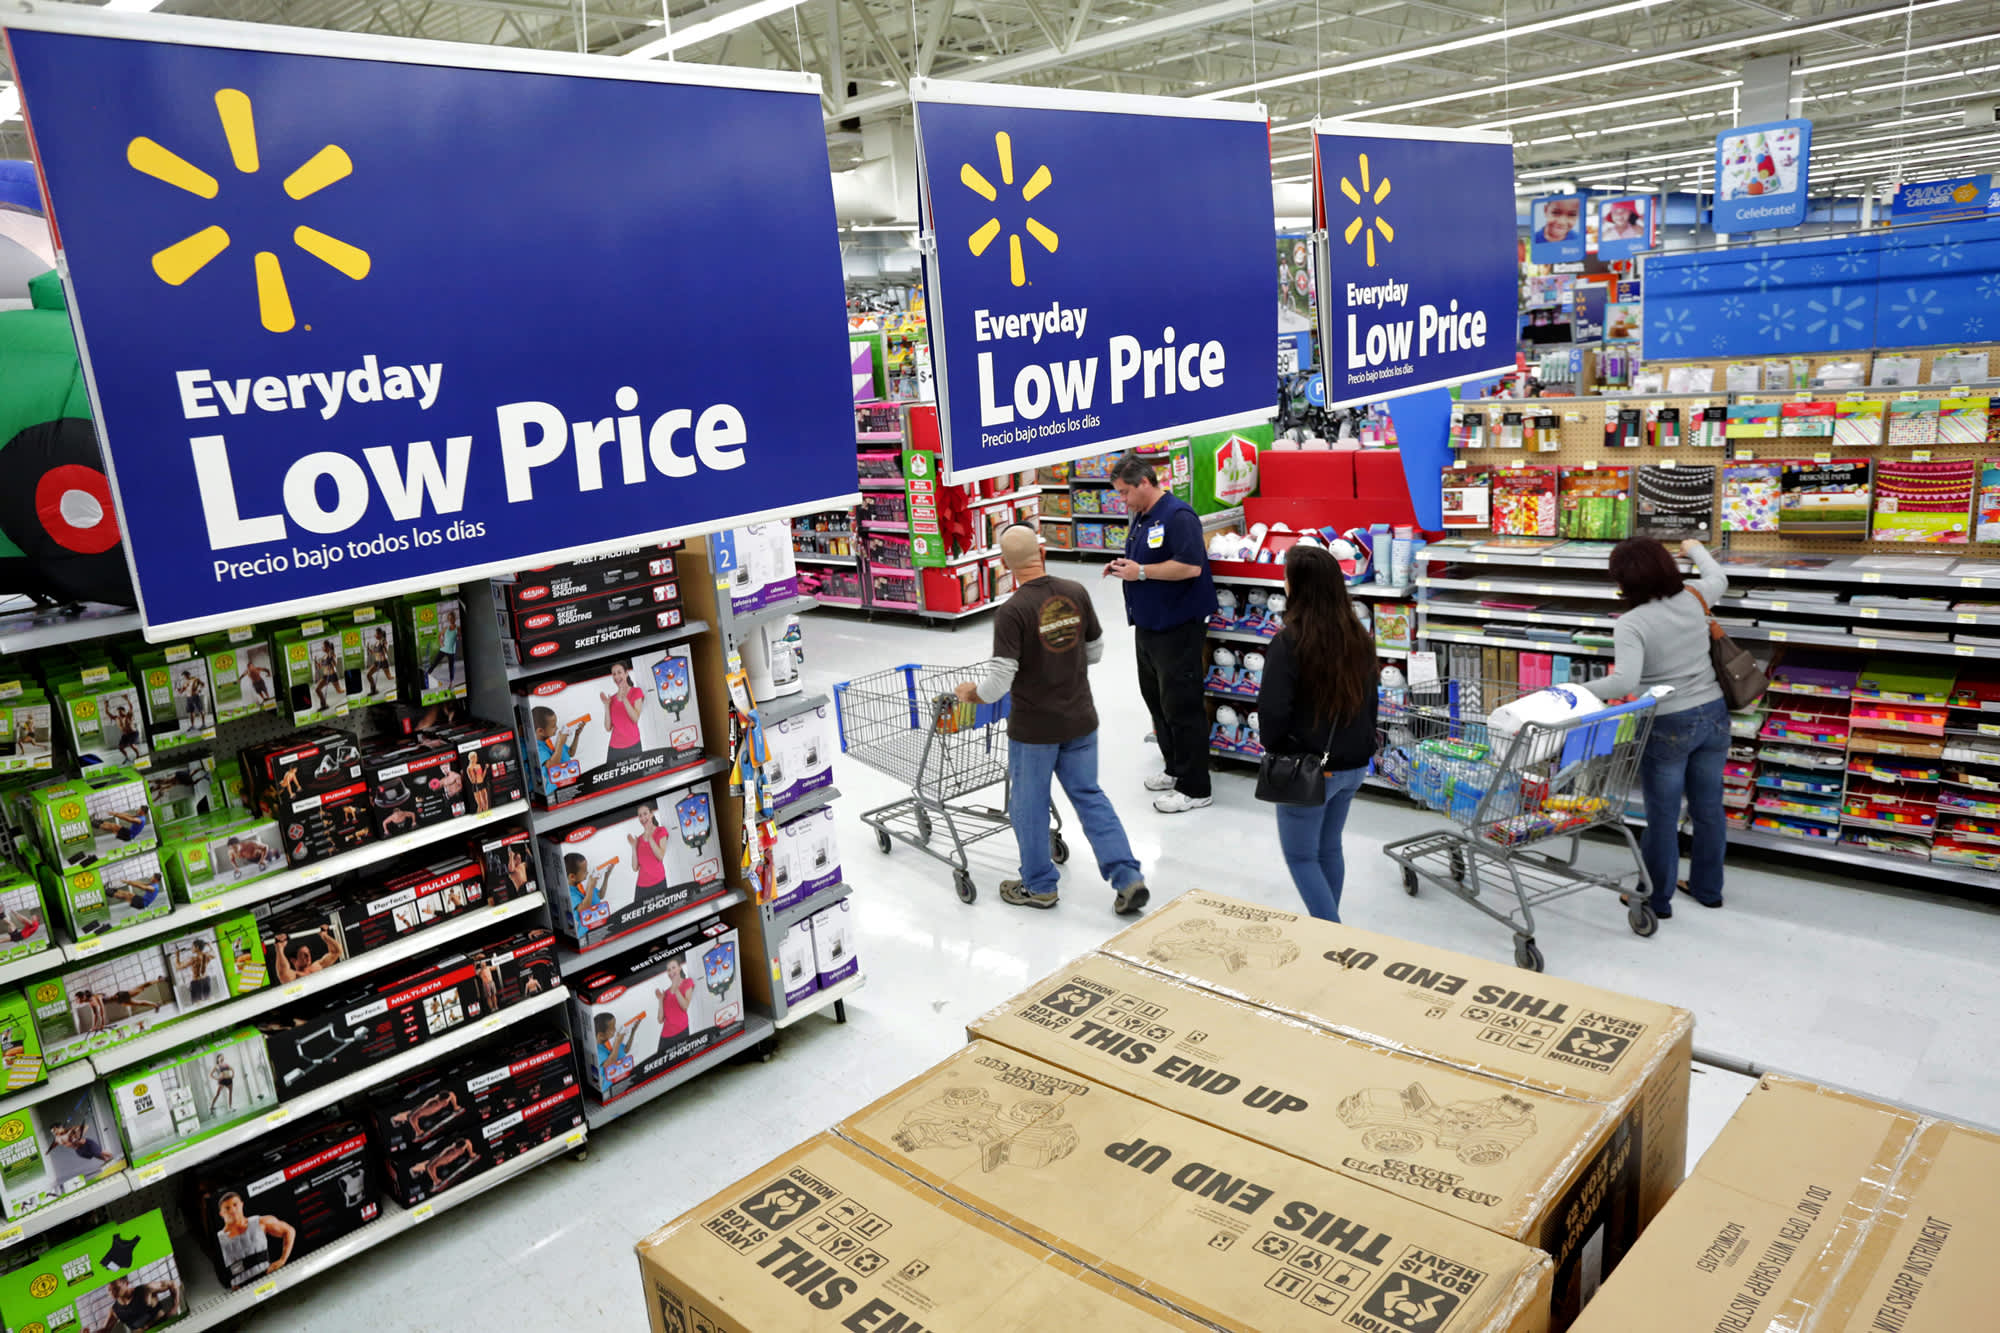 wal-mart-launches-new-front-in-us-price-war-targets-aldi-in-grocery-aisle